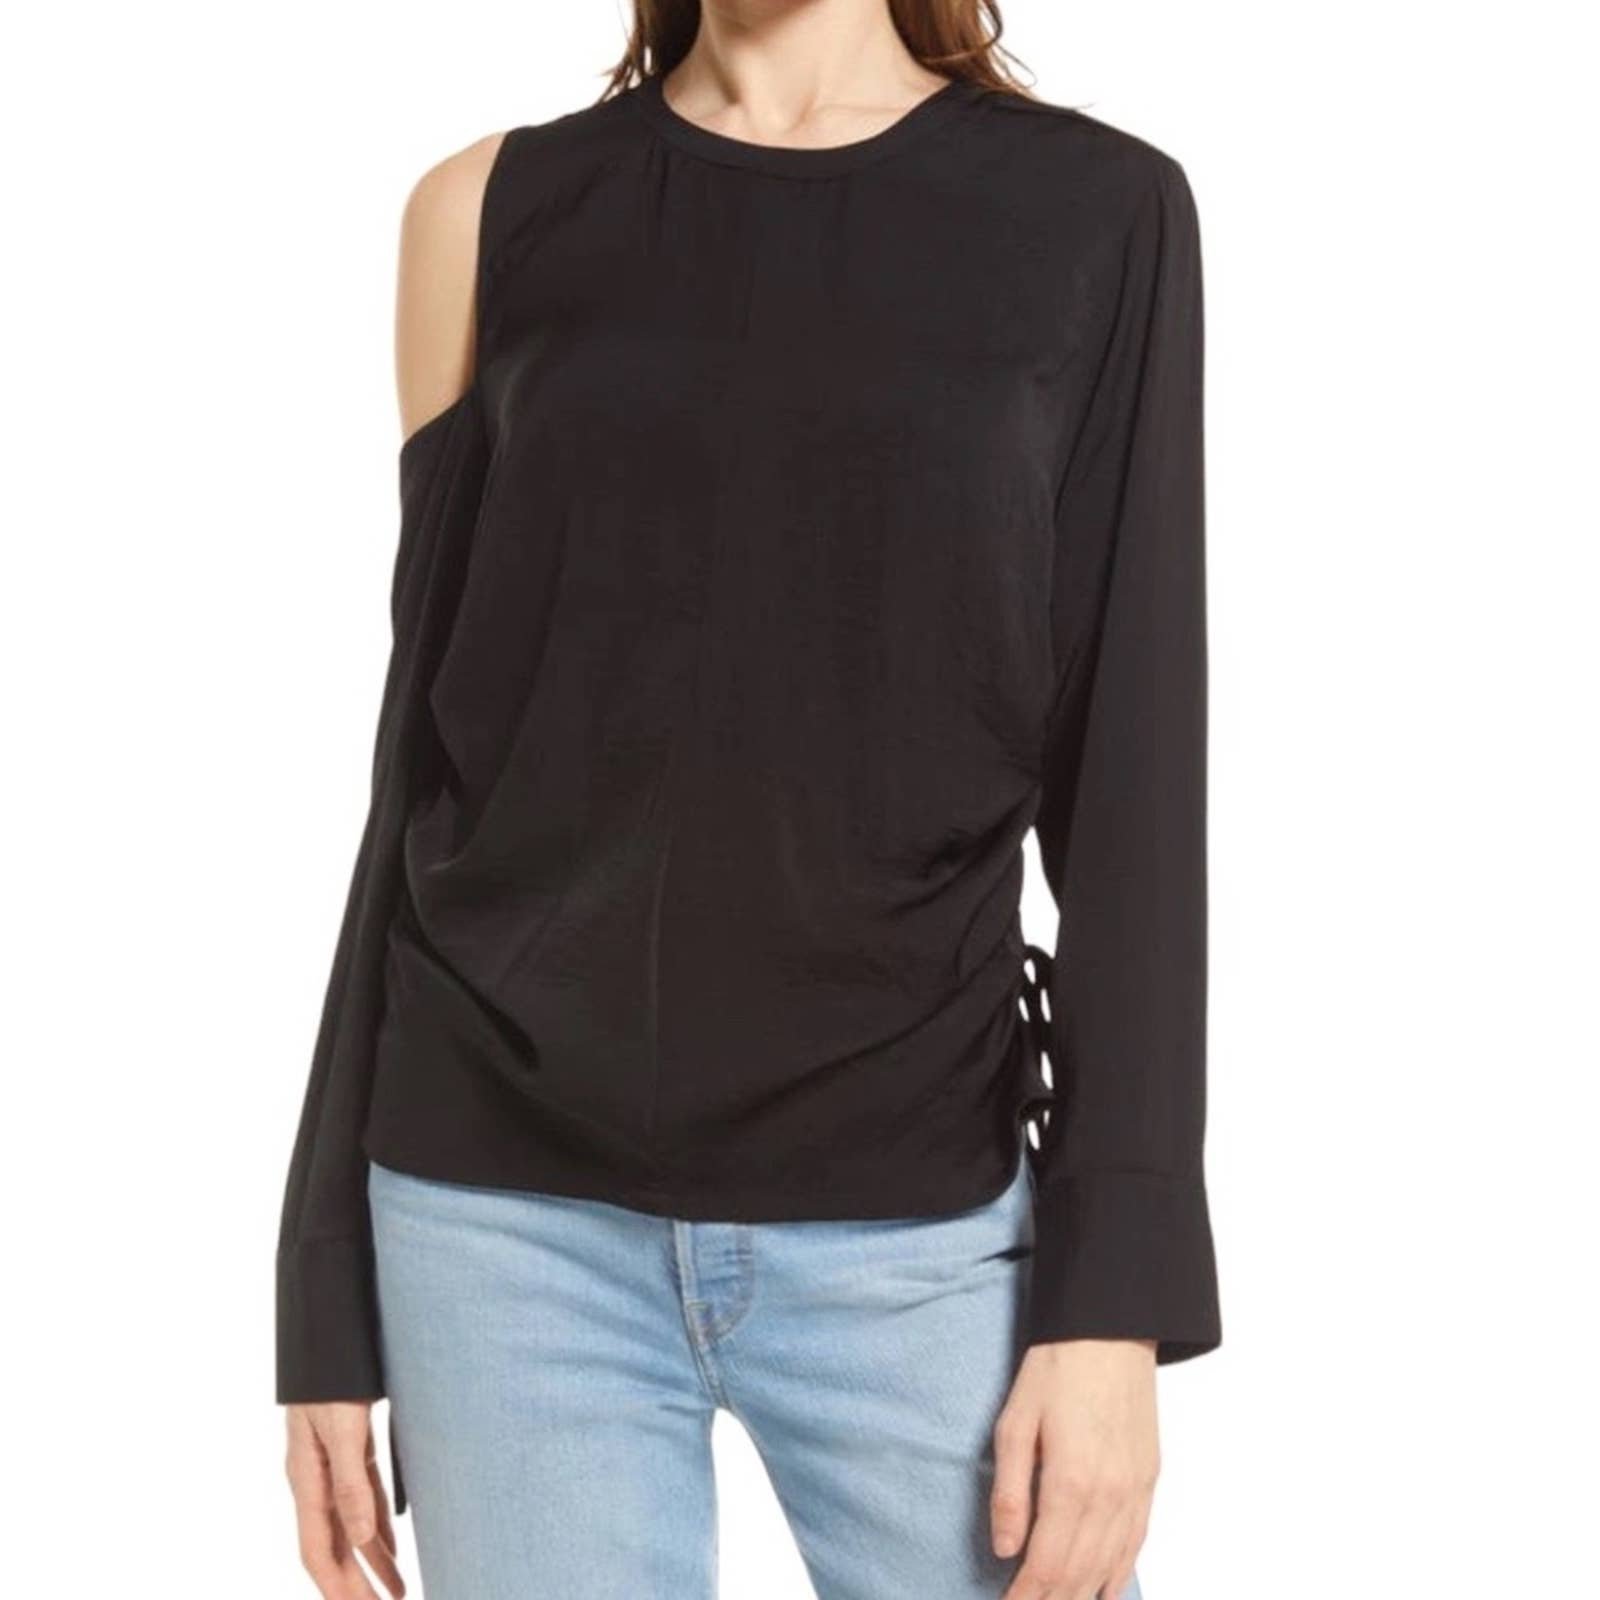 Comfortable Nordstrom Open Edit Single Cold Shoulder Satin Blouse Small Black NWT poGqWkdwf Low Price